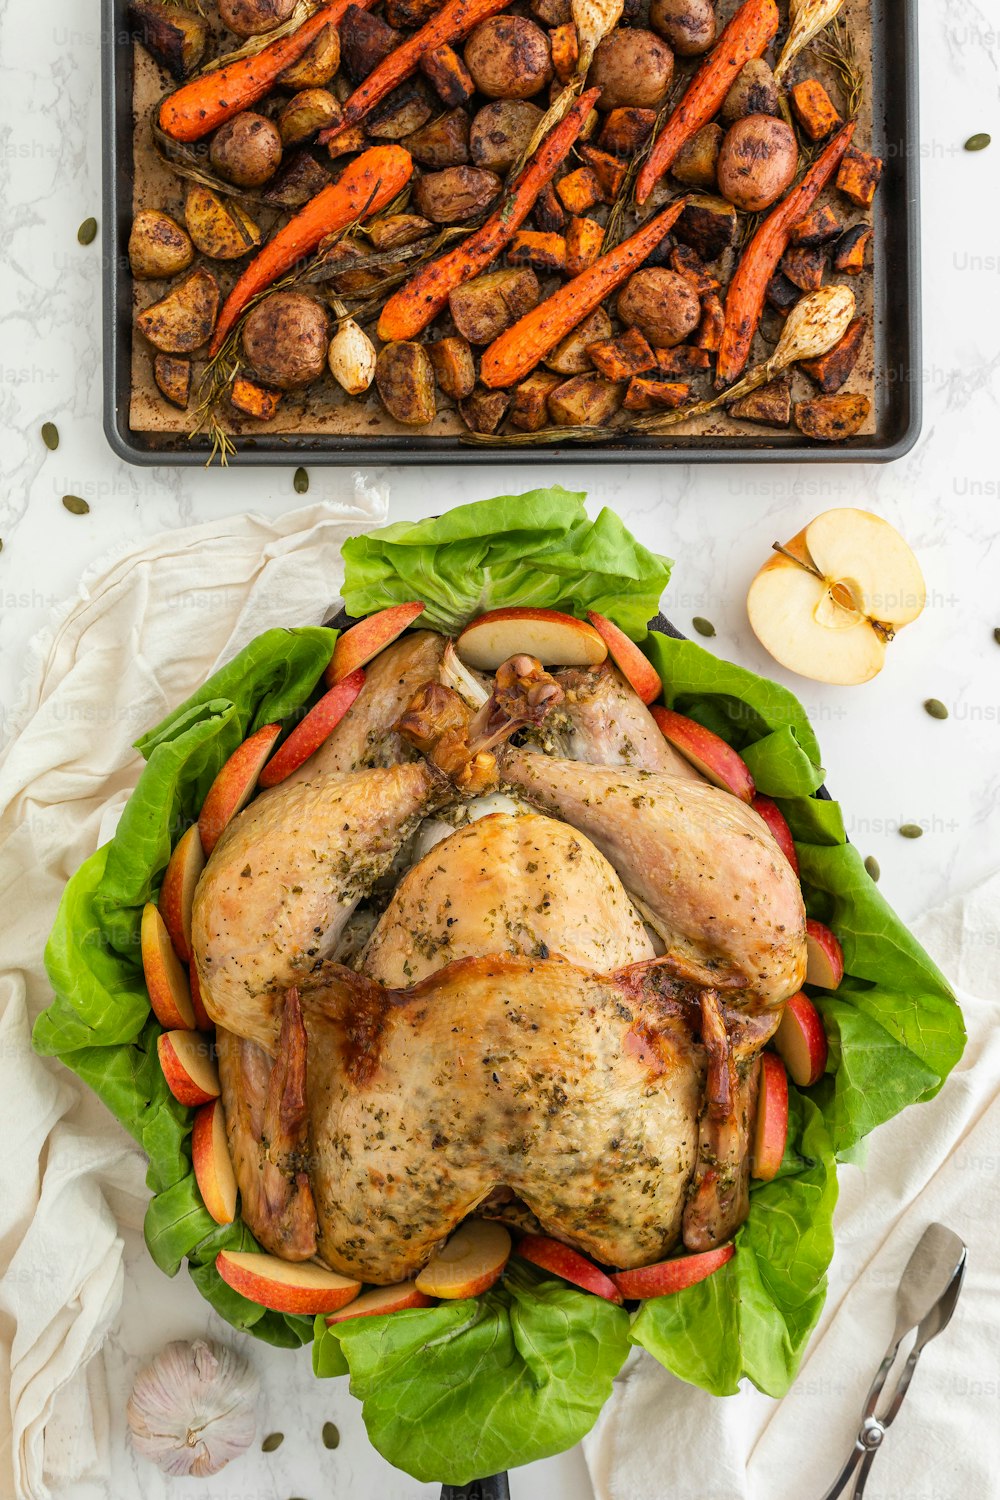 a roasted chicken and carrots on a bed of lettuce